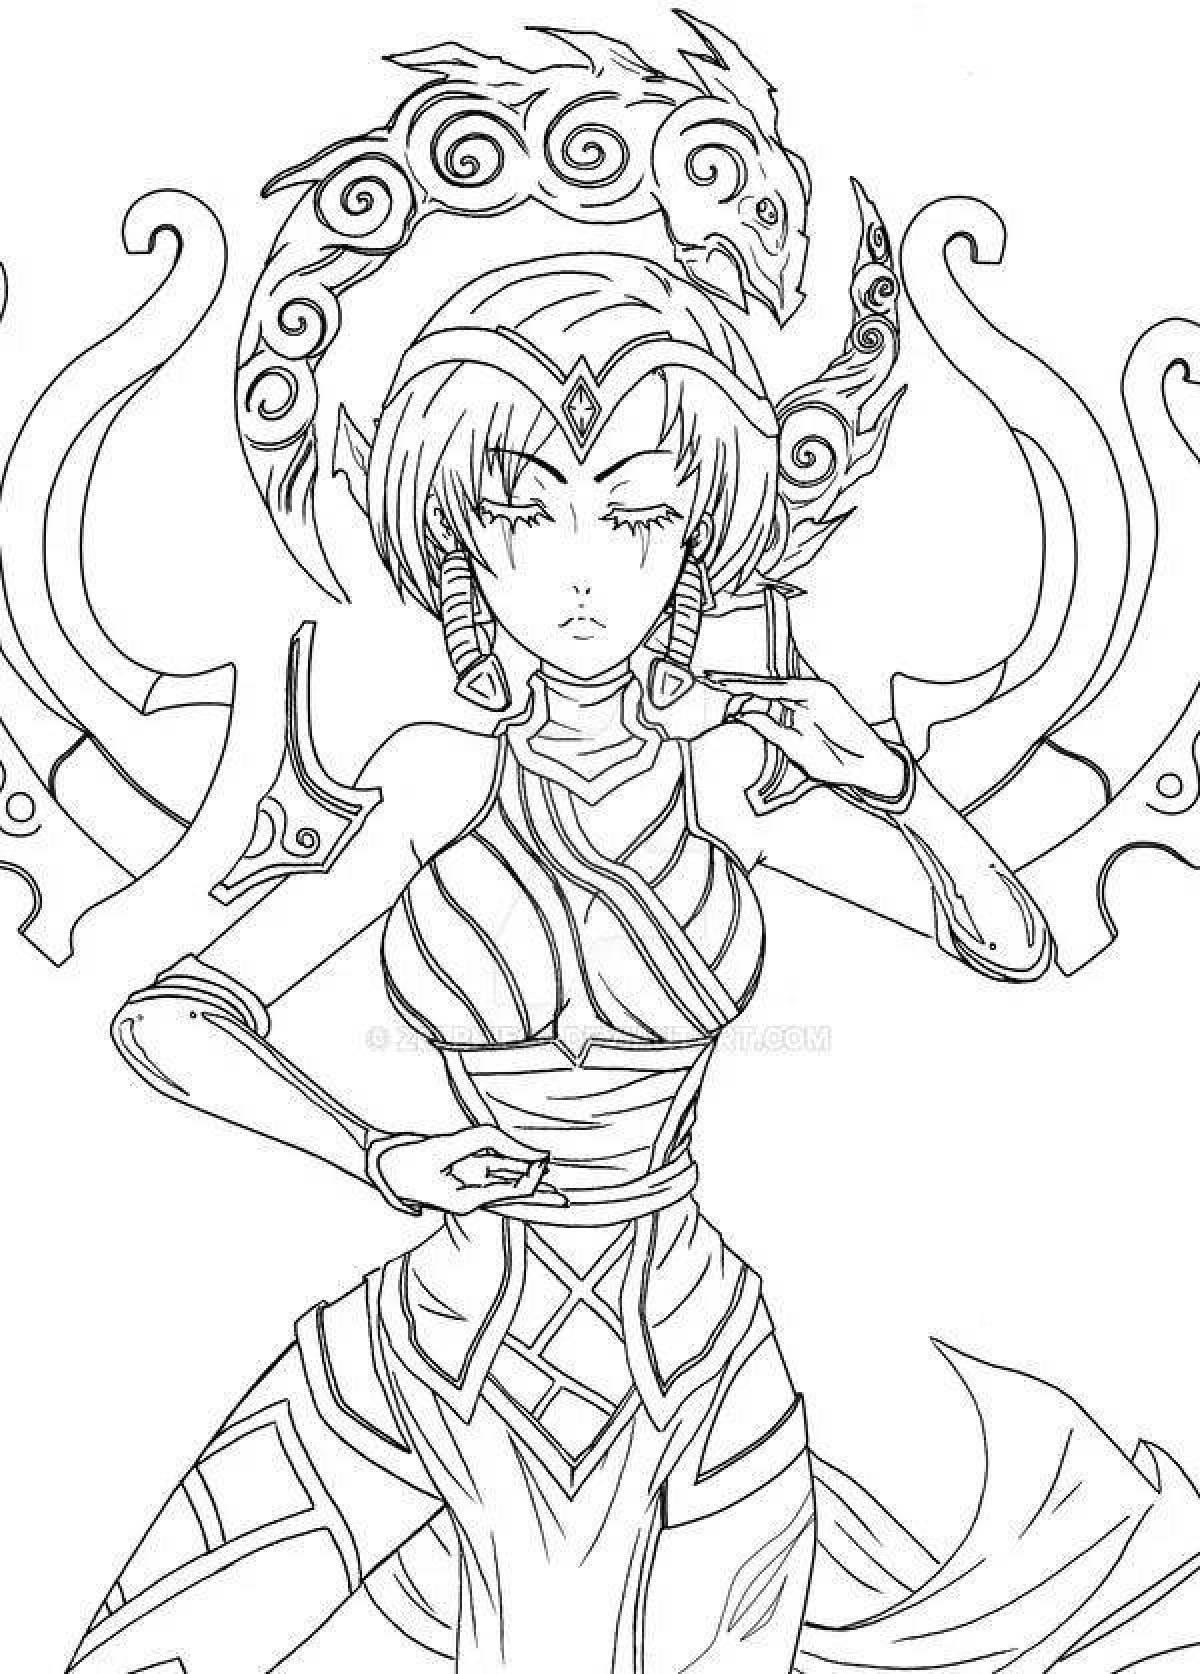 Glorious league of legends coloring page